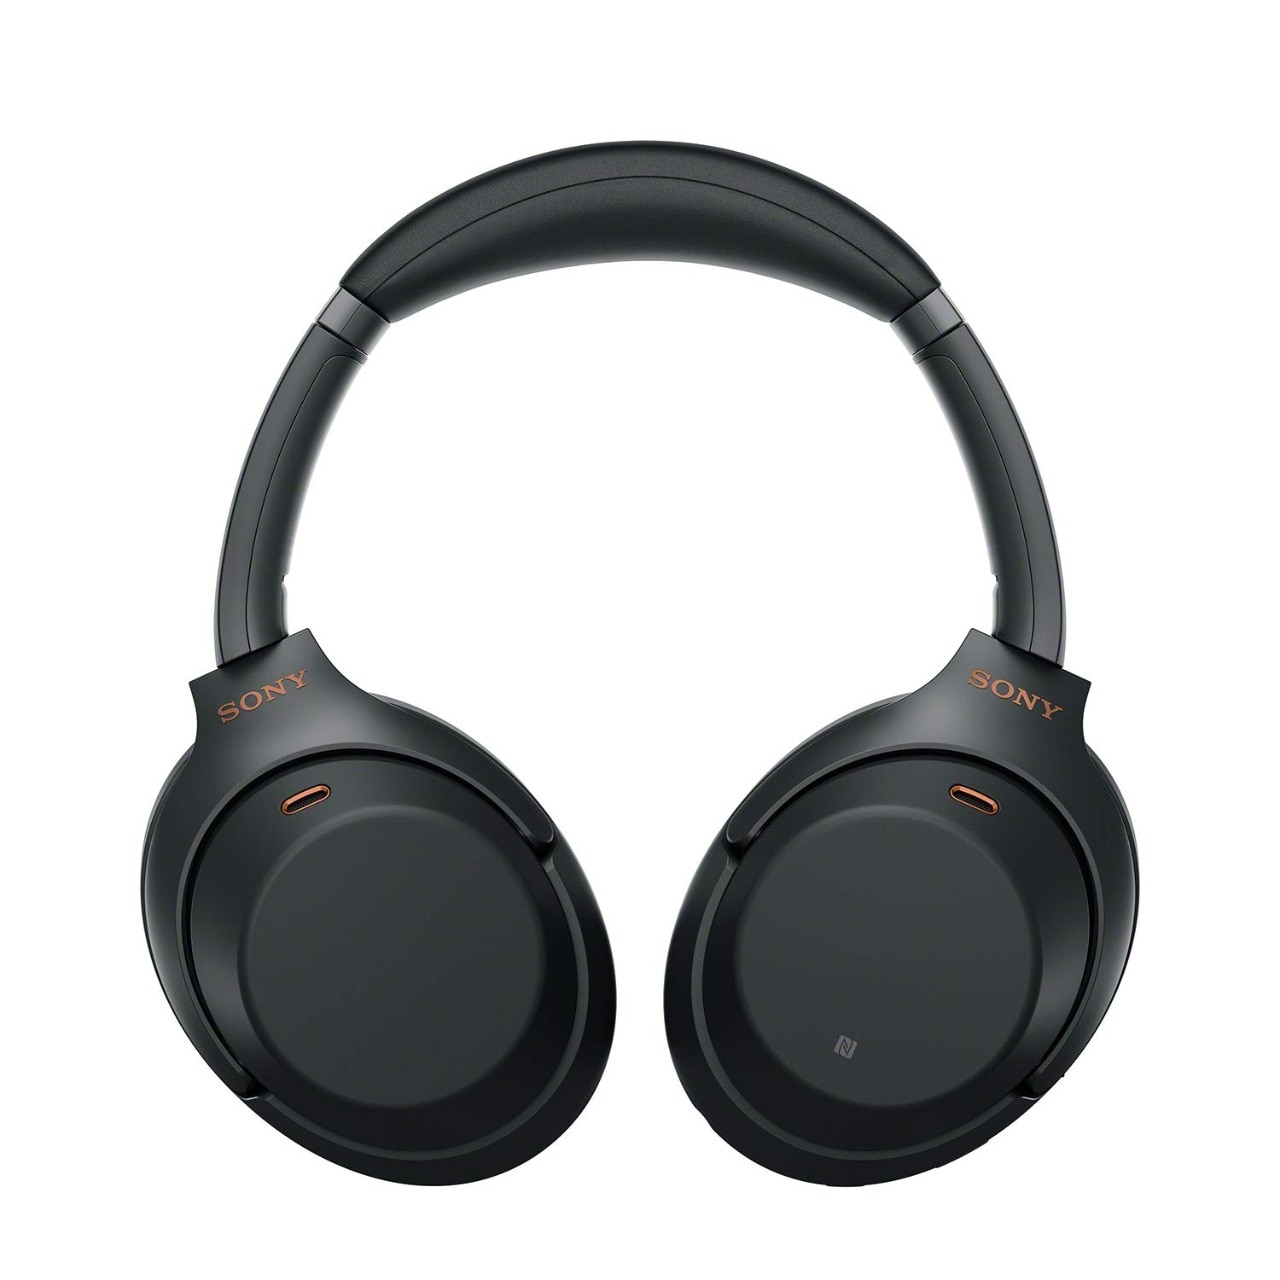 Amazon Great Indian Festival Sale: Know Top 5 Deals On Wireless Bluetooth Headphones